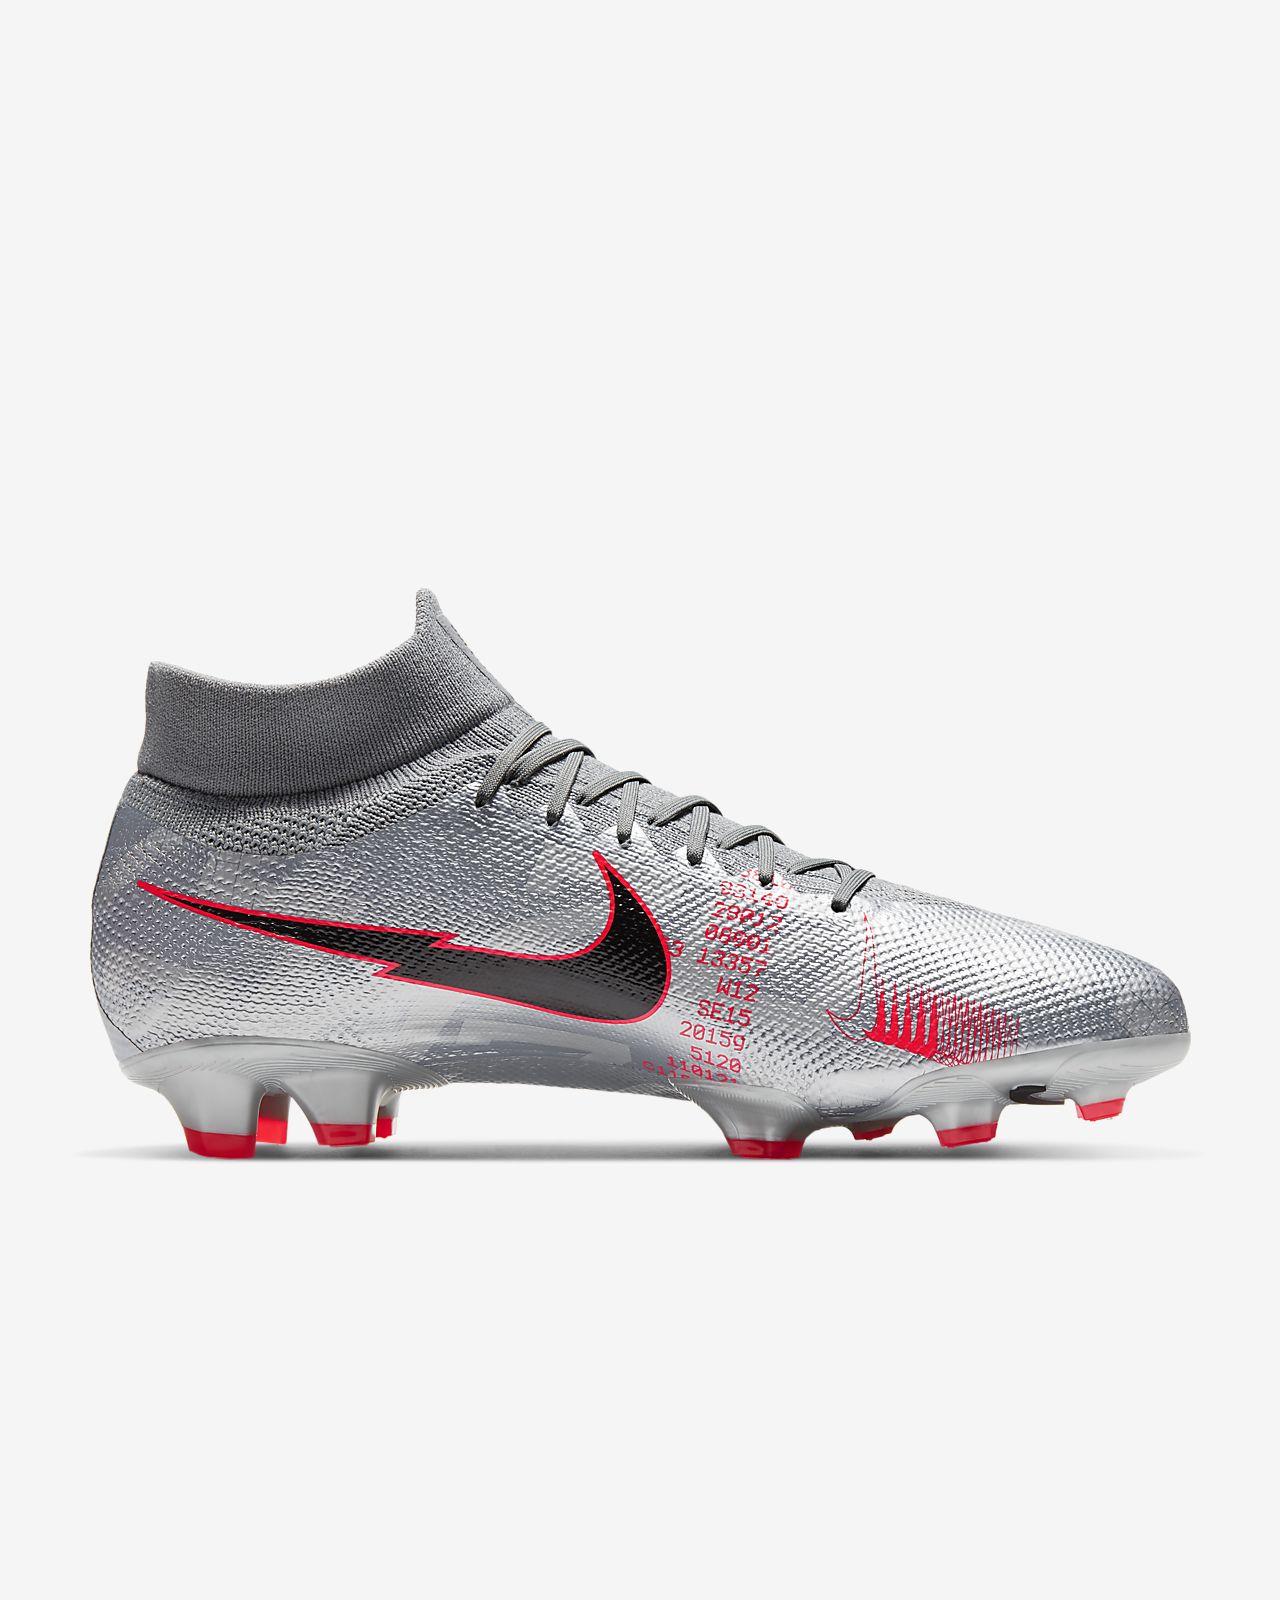 Football Boots Nike Mercurial Superfly VII Elite AG PRO Laser.